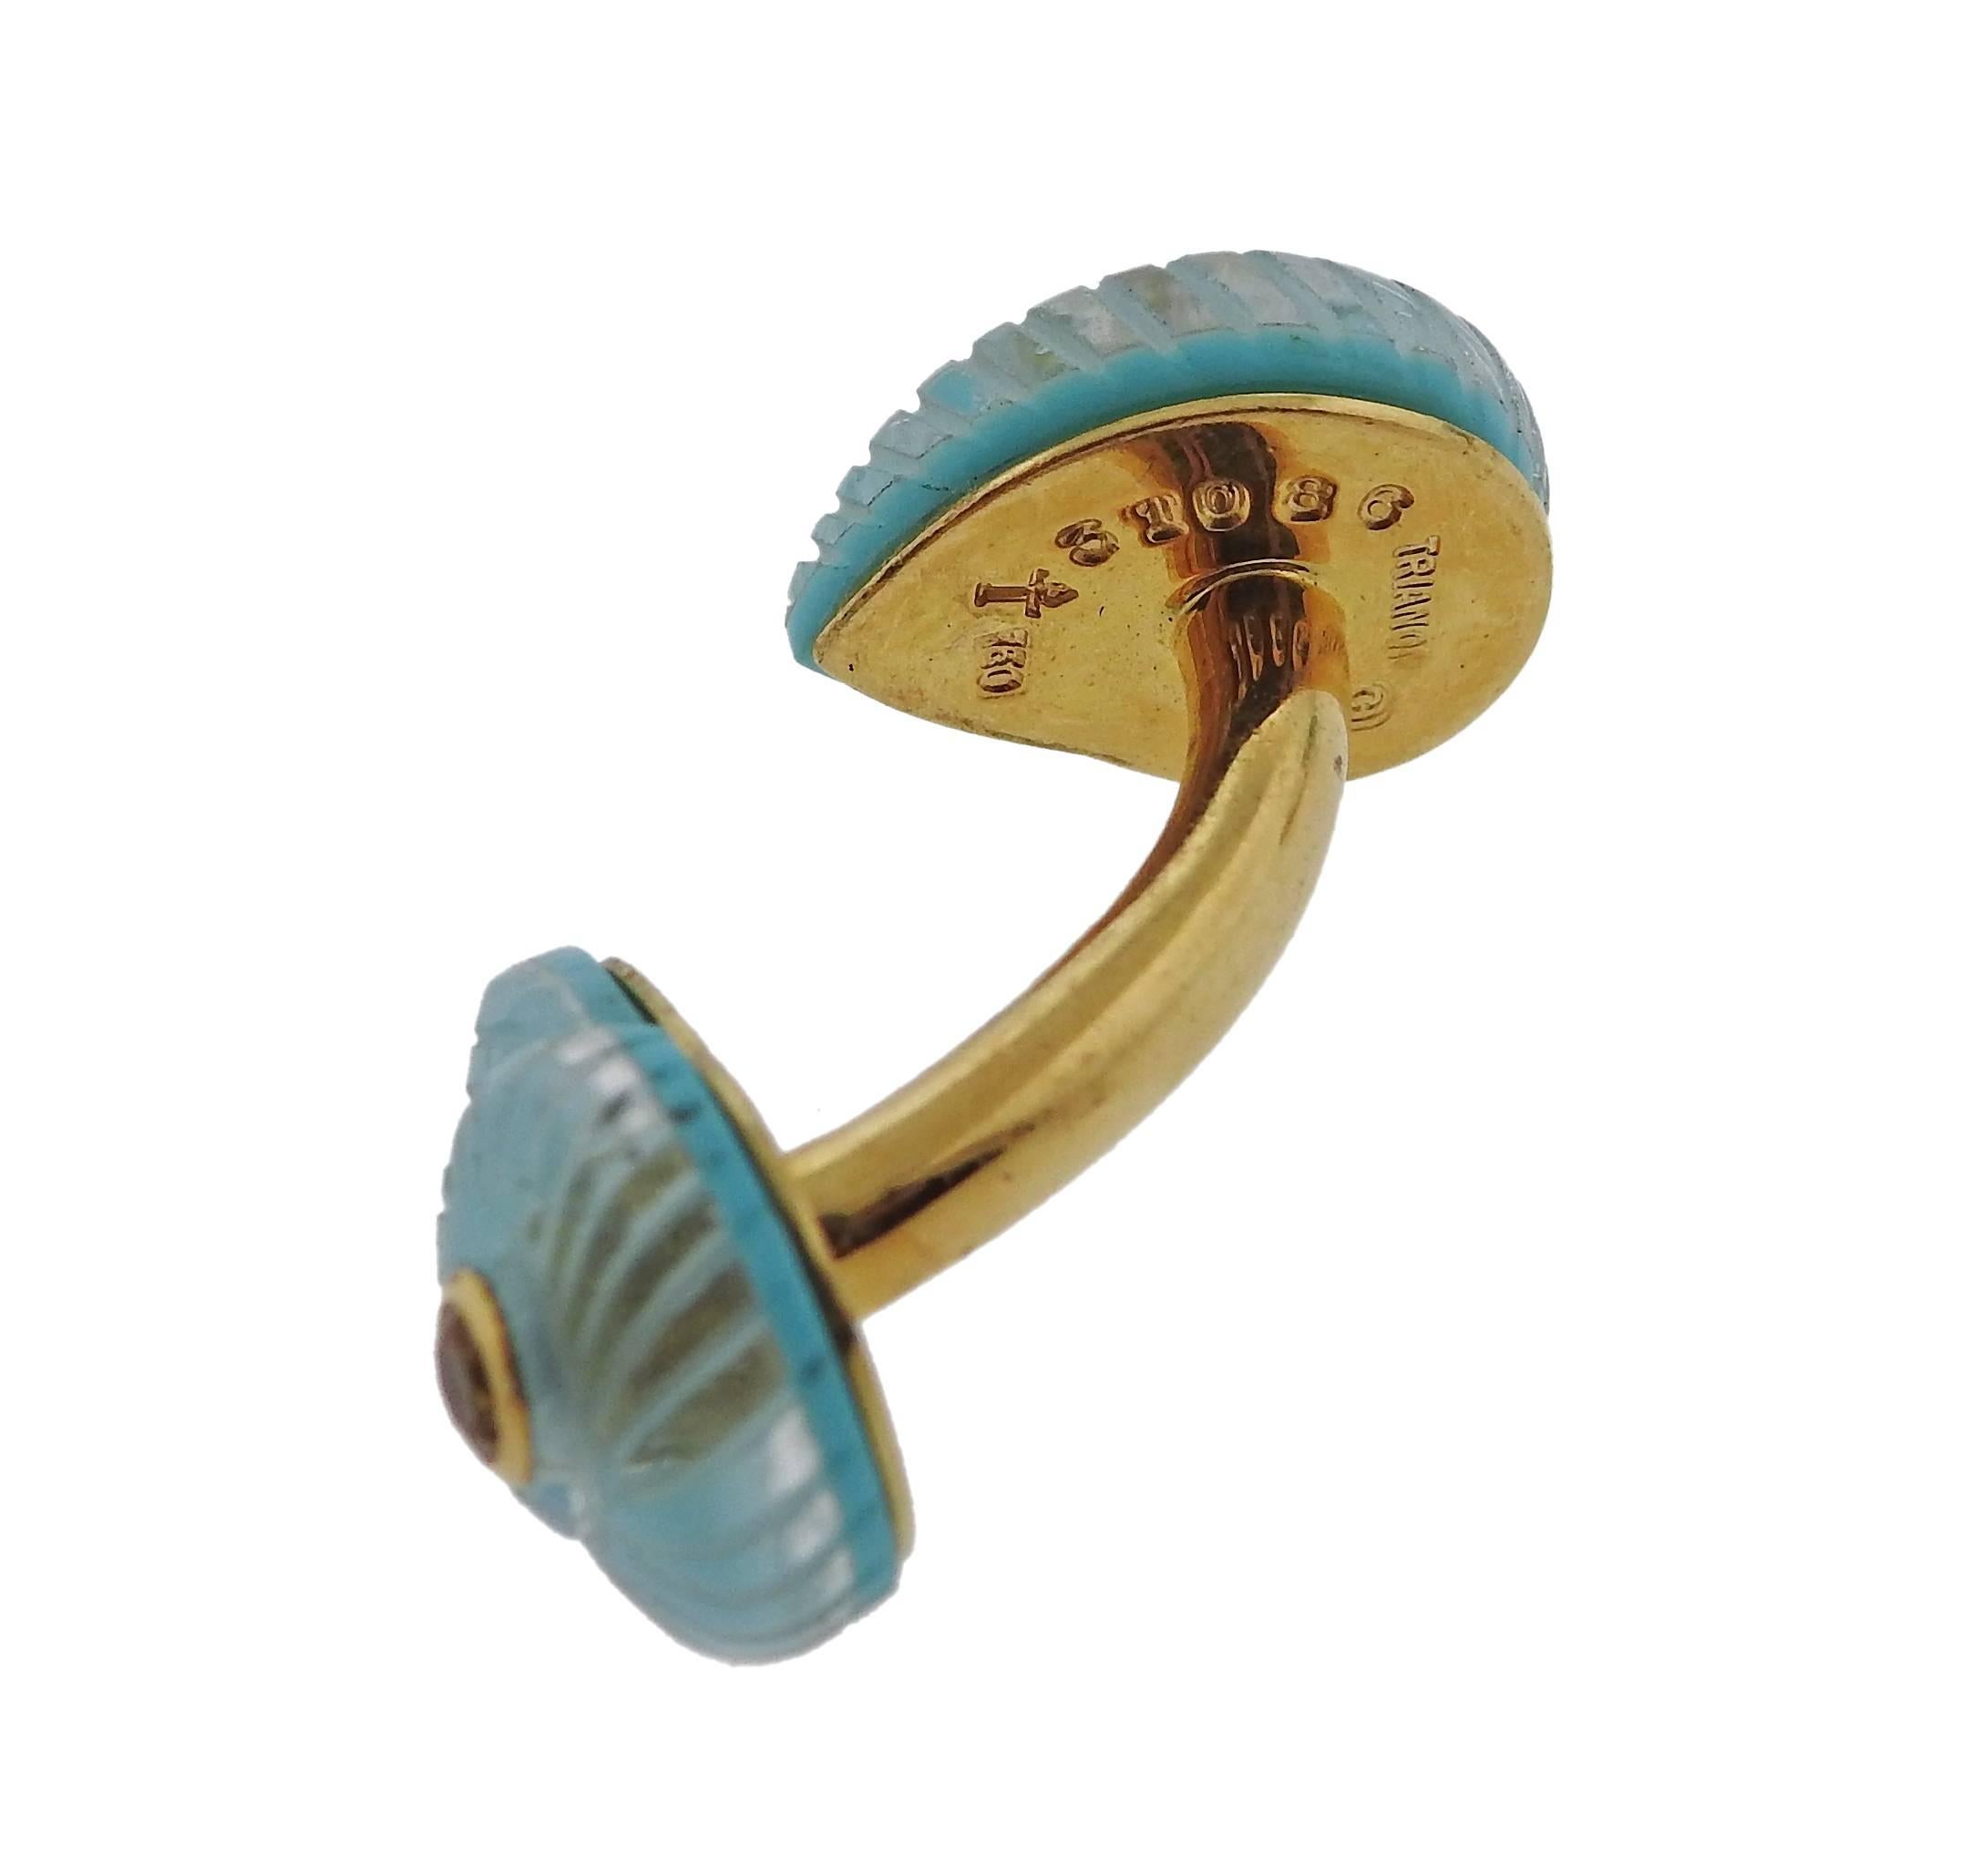 Pair of 18k yellow gold shell motif cufflinks, crafted by Trianon, decorated with carved crystal, backed with turquoise, with a citrine in the center. Cufflink top is 15mm x 11mm , weight - 10.2 grams. Markes: Trianon, 750, 31086.